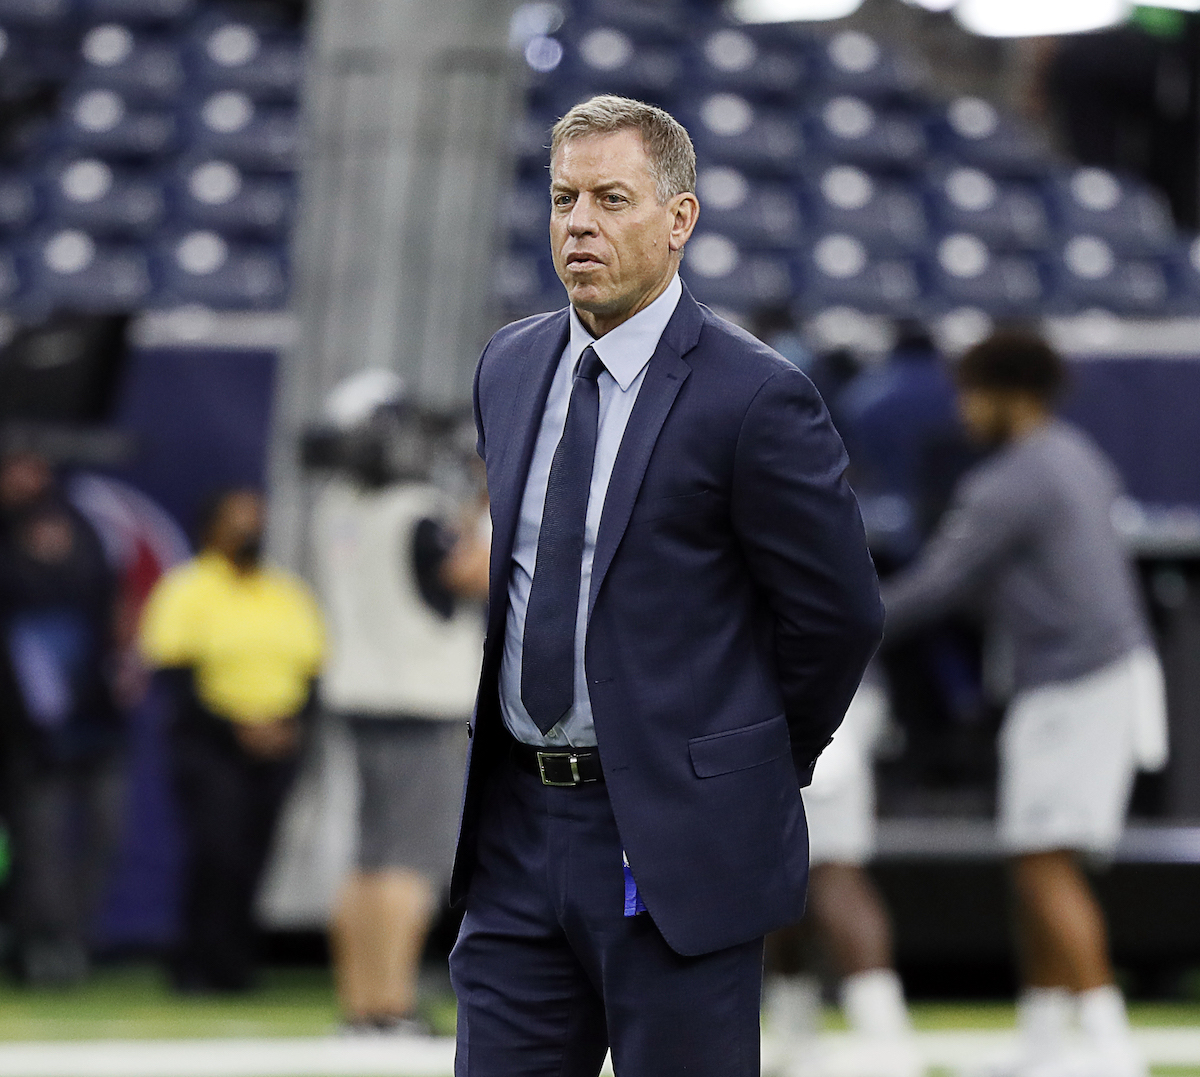 NFL on FOX personality Troy Aikman watches warmups prior to a game between the Carolina Panthers and the Houston Texans